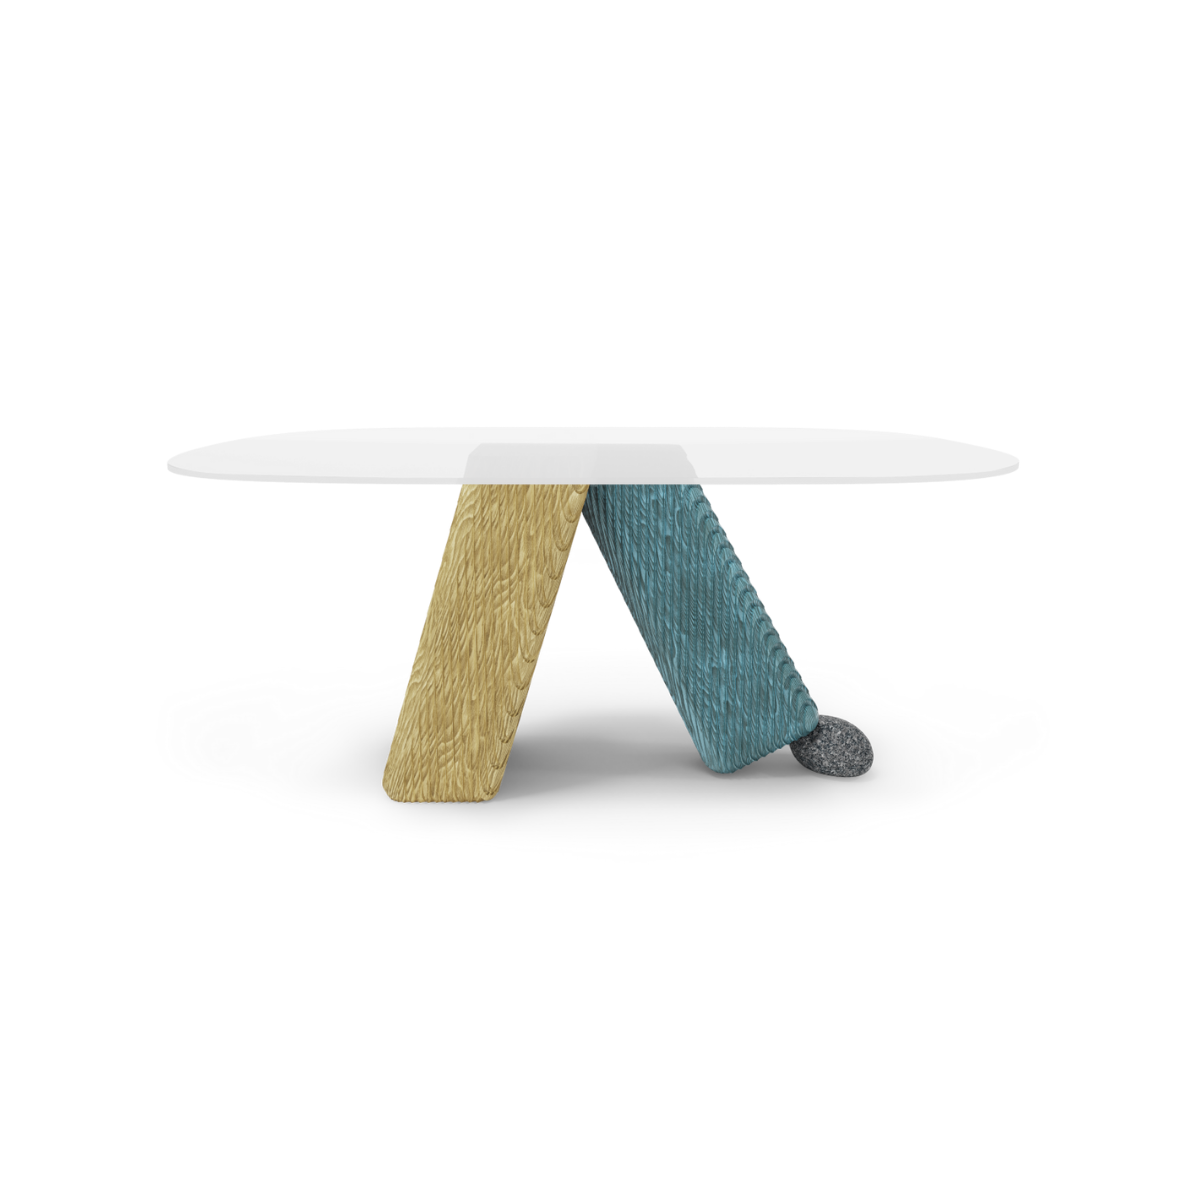 heel-stone-round-dining-table-covet-collection-ptang-studio